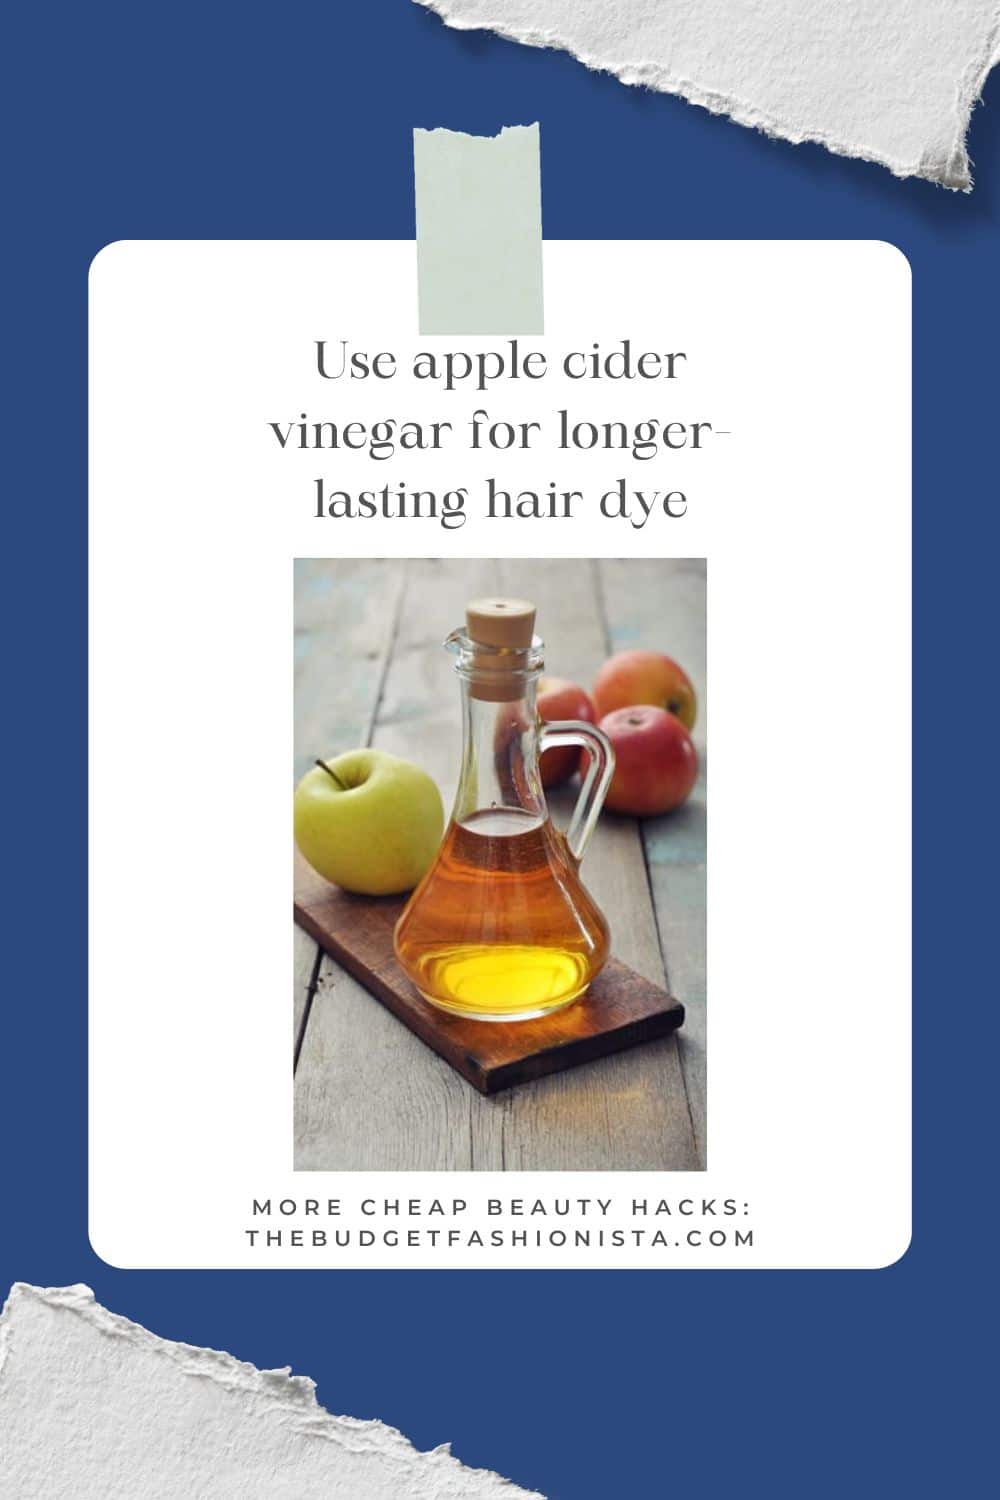 Bottle of apple cider vinegar as cheap beauty hack with text overlay.